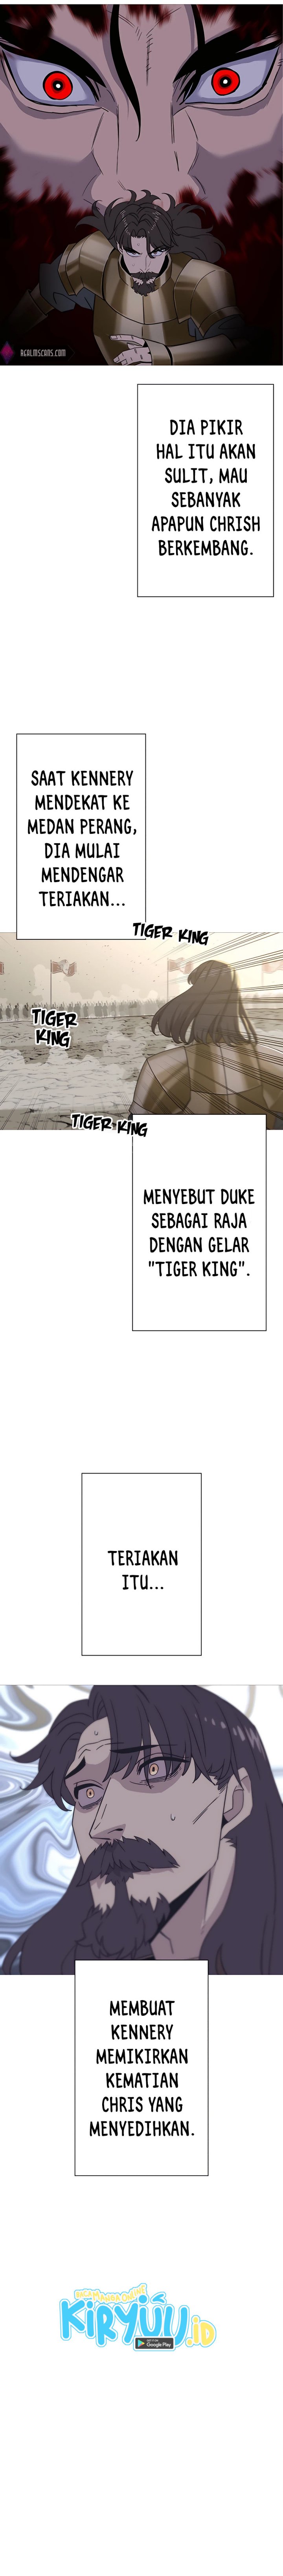 Dilarang COPAS - situs resmi www.mangacanblog.com - Komik the story of a low rank soldier becoming a monarch 093 - chapter 93 94 Indonesia the story of a low rank soldier becoming a monarch 093 - chapter 93 Terbaru 12|Baca Manga Komik Indonesia|Mangacan